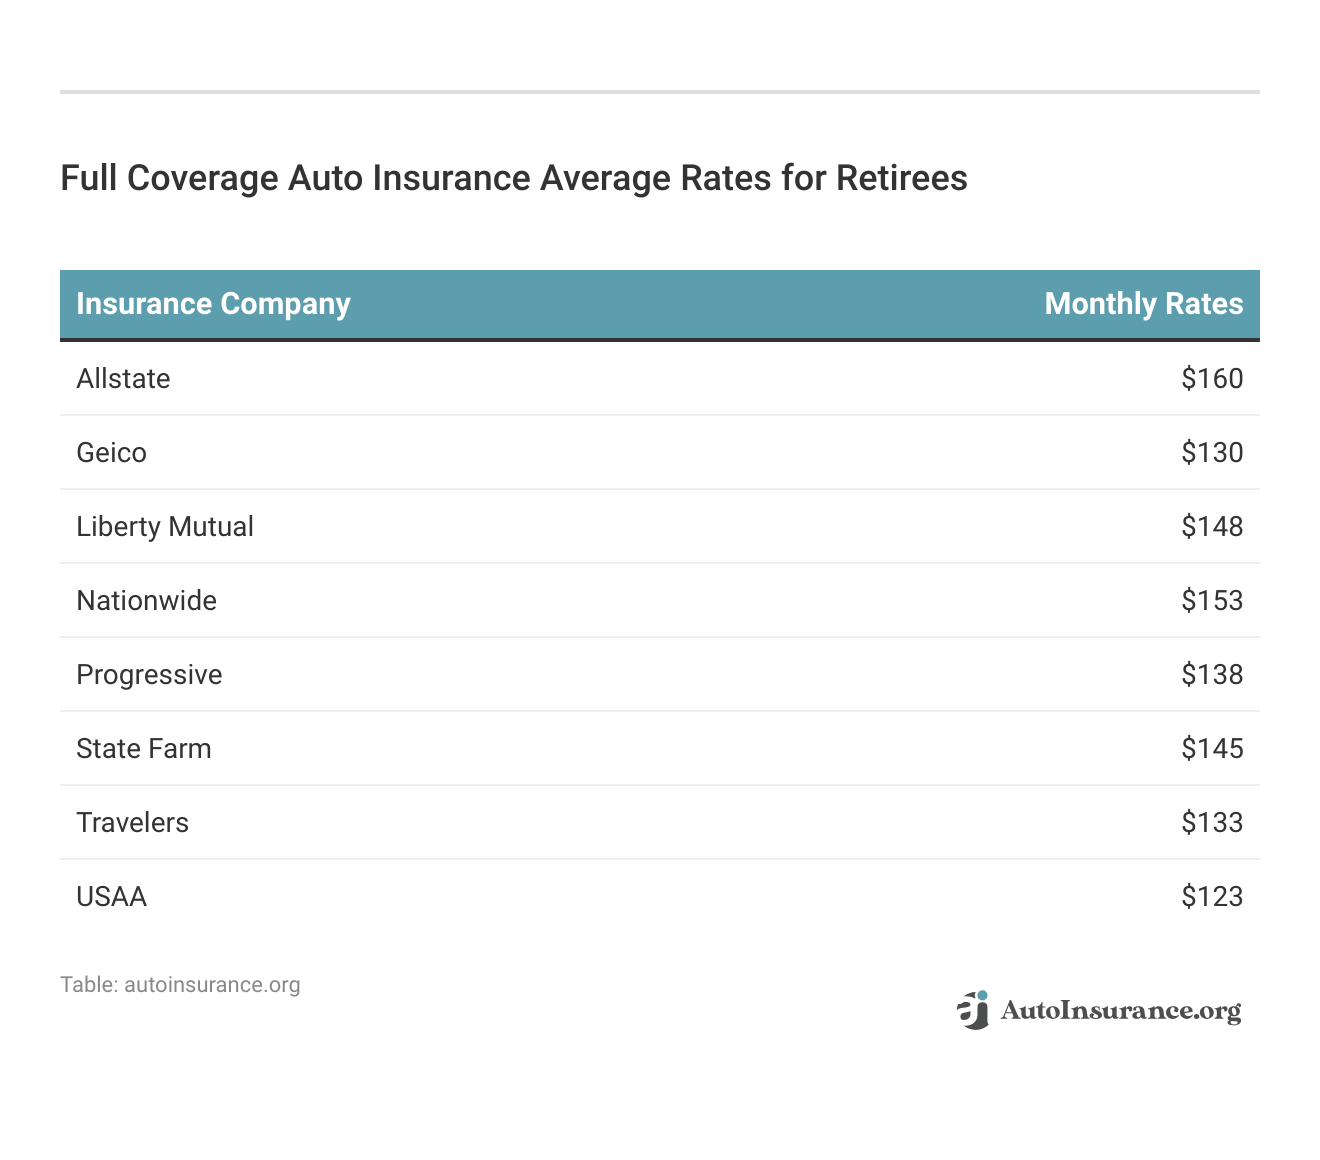 <h3>Full Coverage Auto Insurance Average Rates for Retirees<h3/>